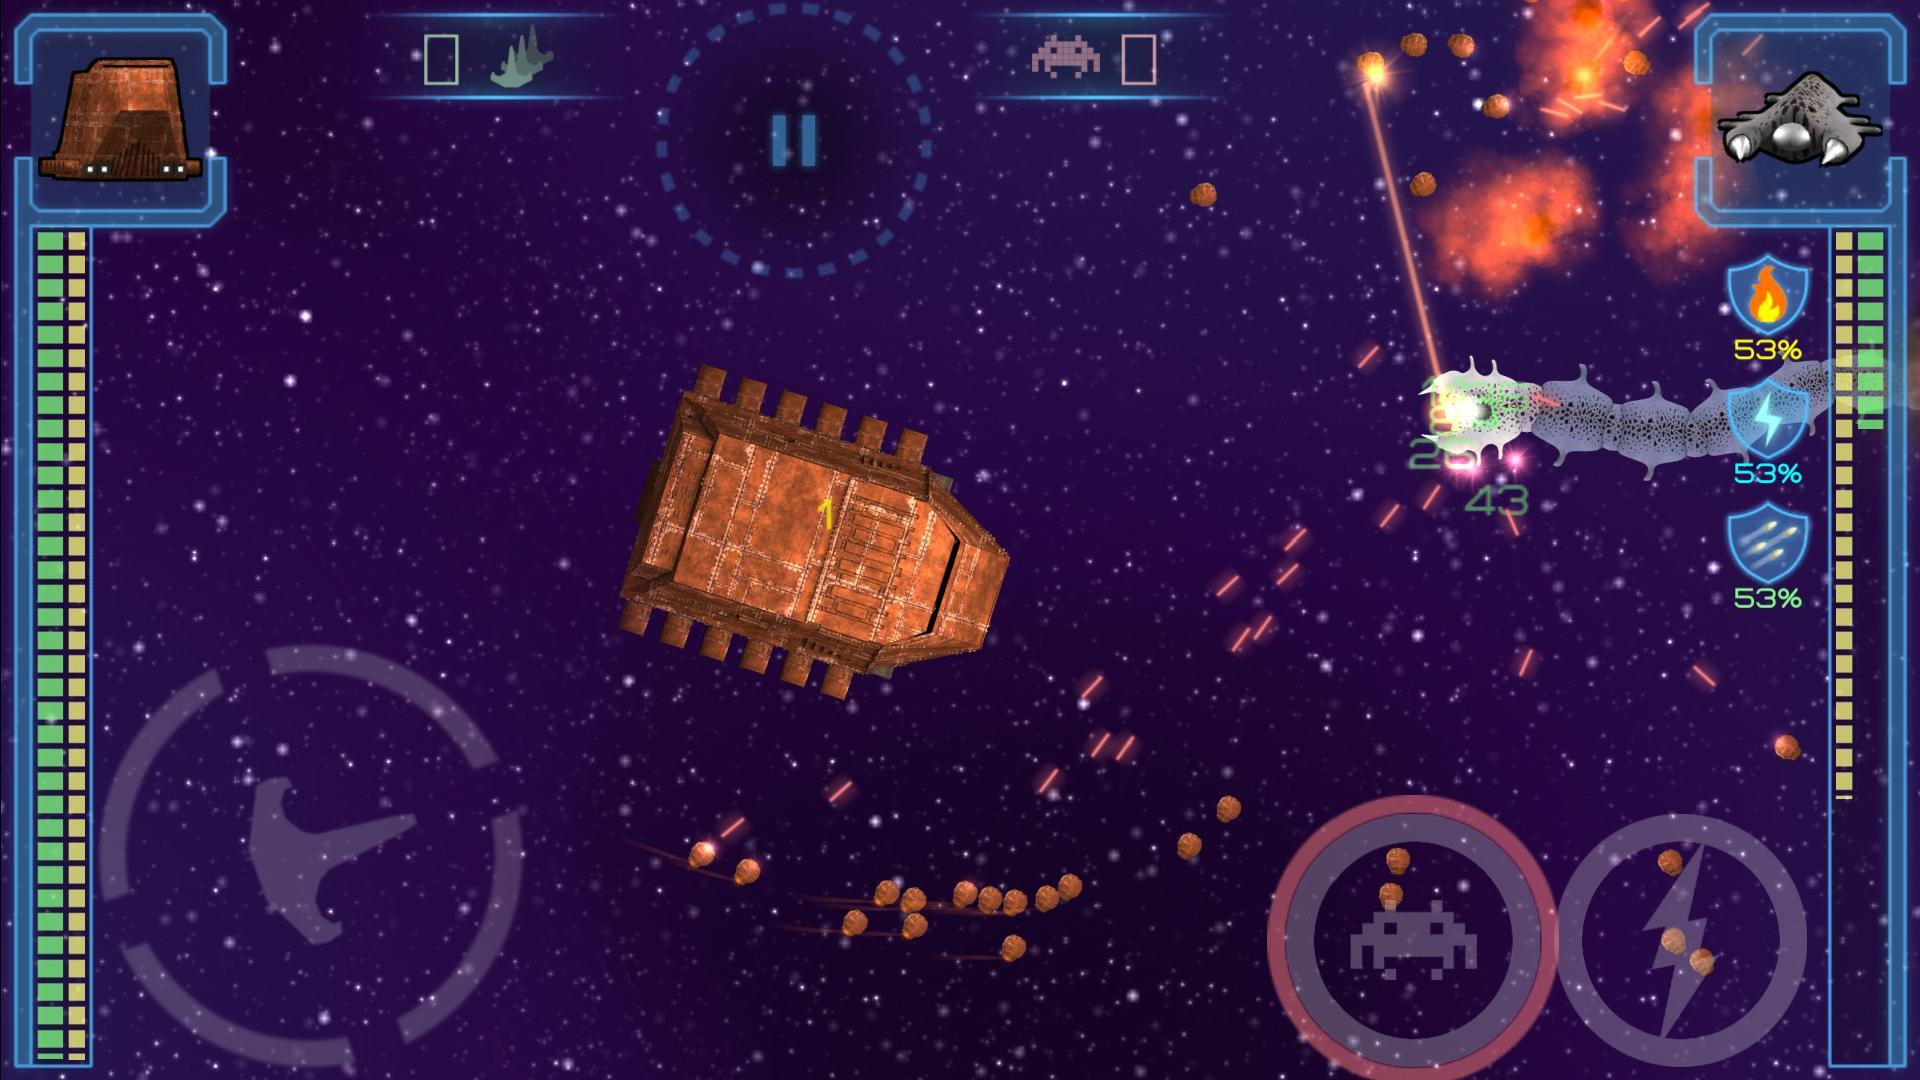 Event Horizon For Android - APK Download